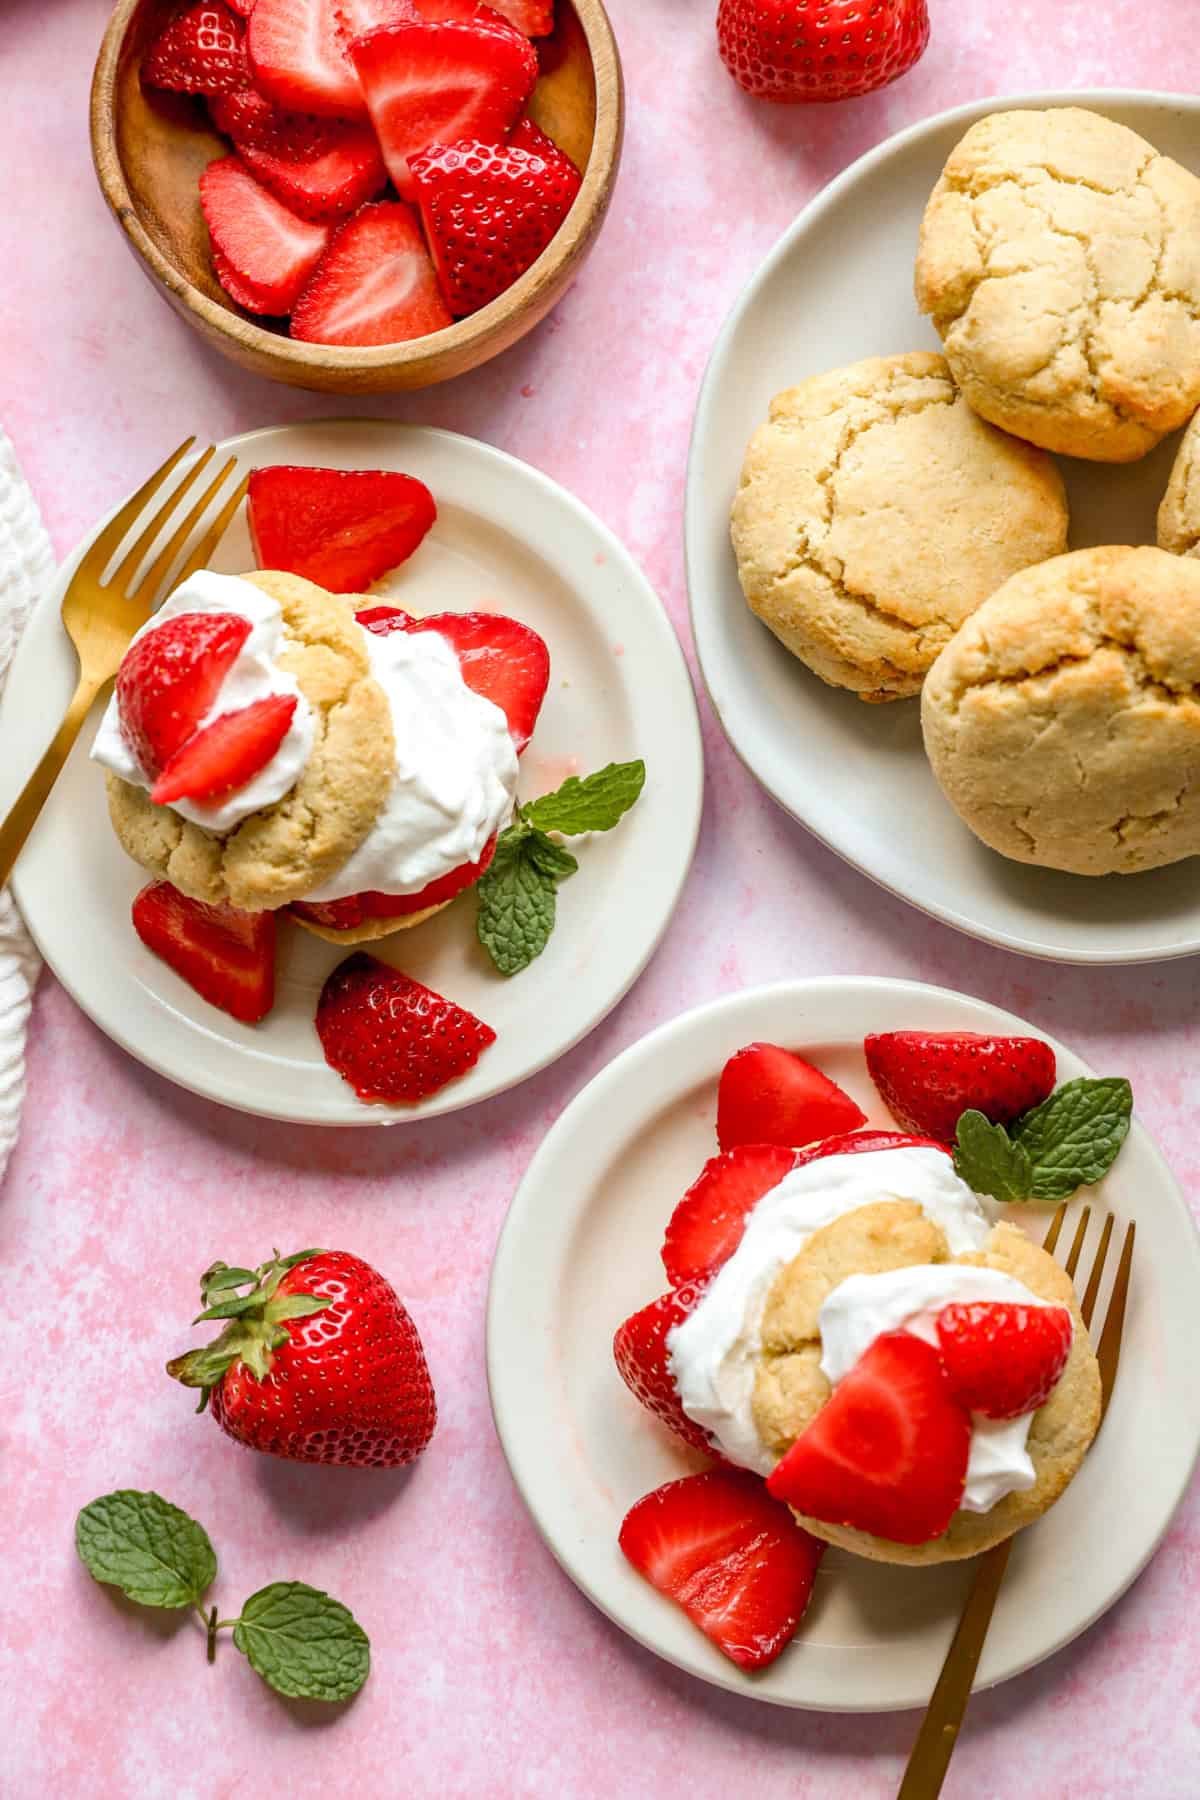 Two plates of gluten free strawberry shortcake next to a plate of drop biscuits. 